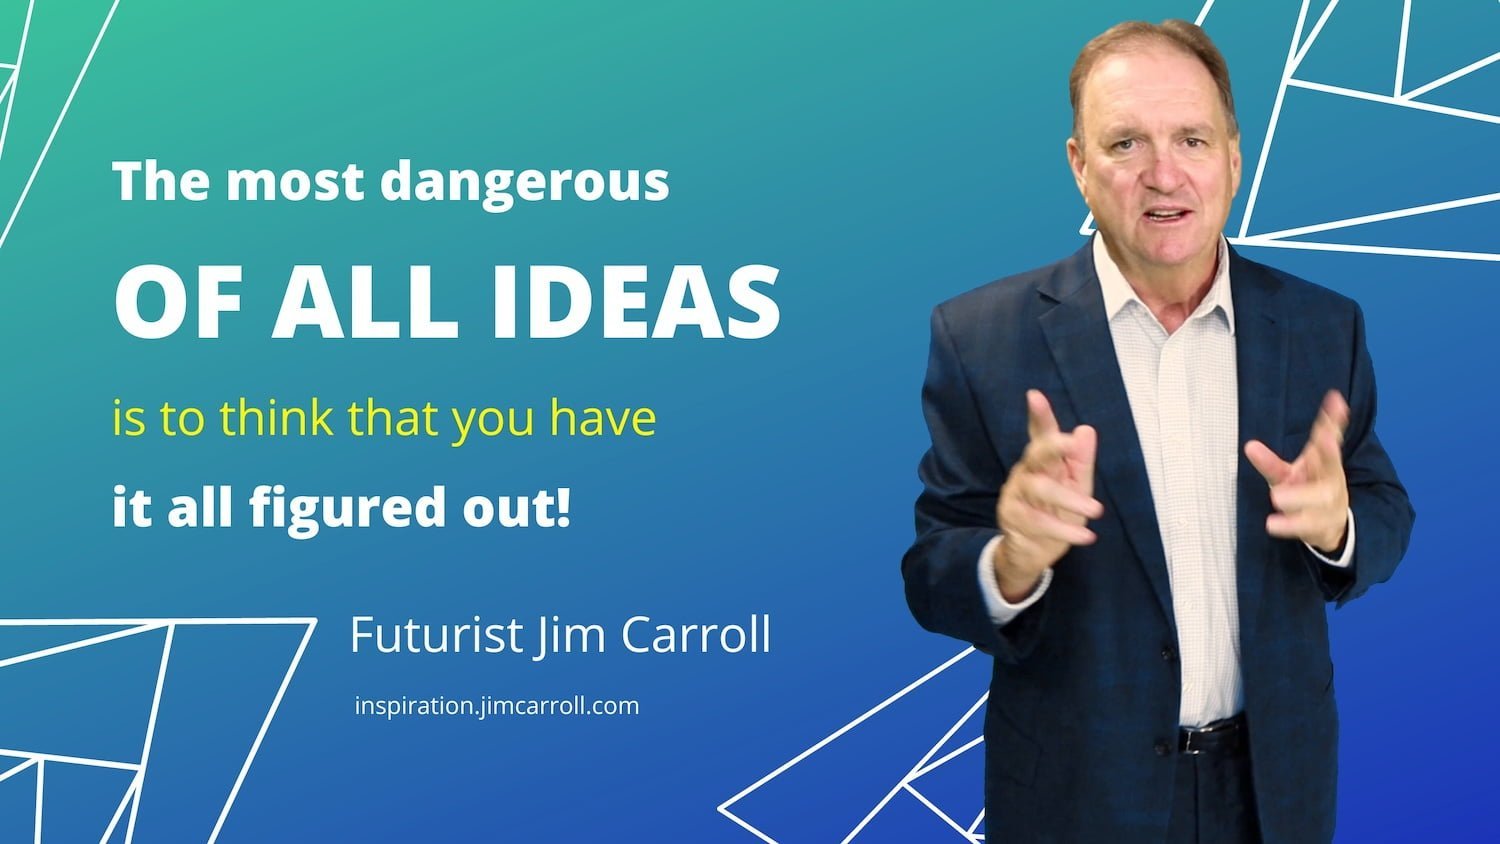 Daily Inspiration: "The most dangerous of all ideas is to think that you have it all figured out!"